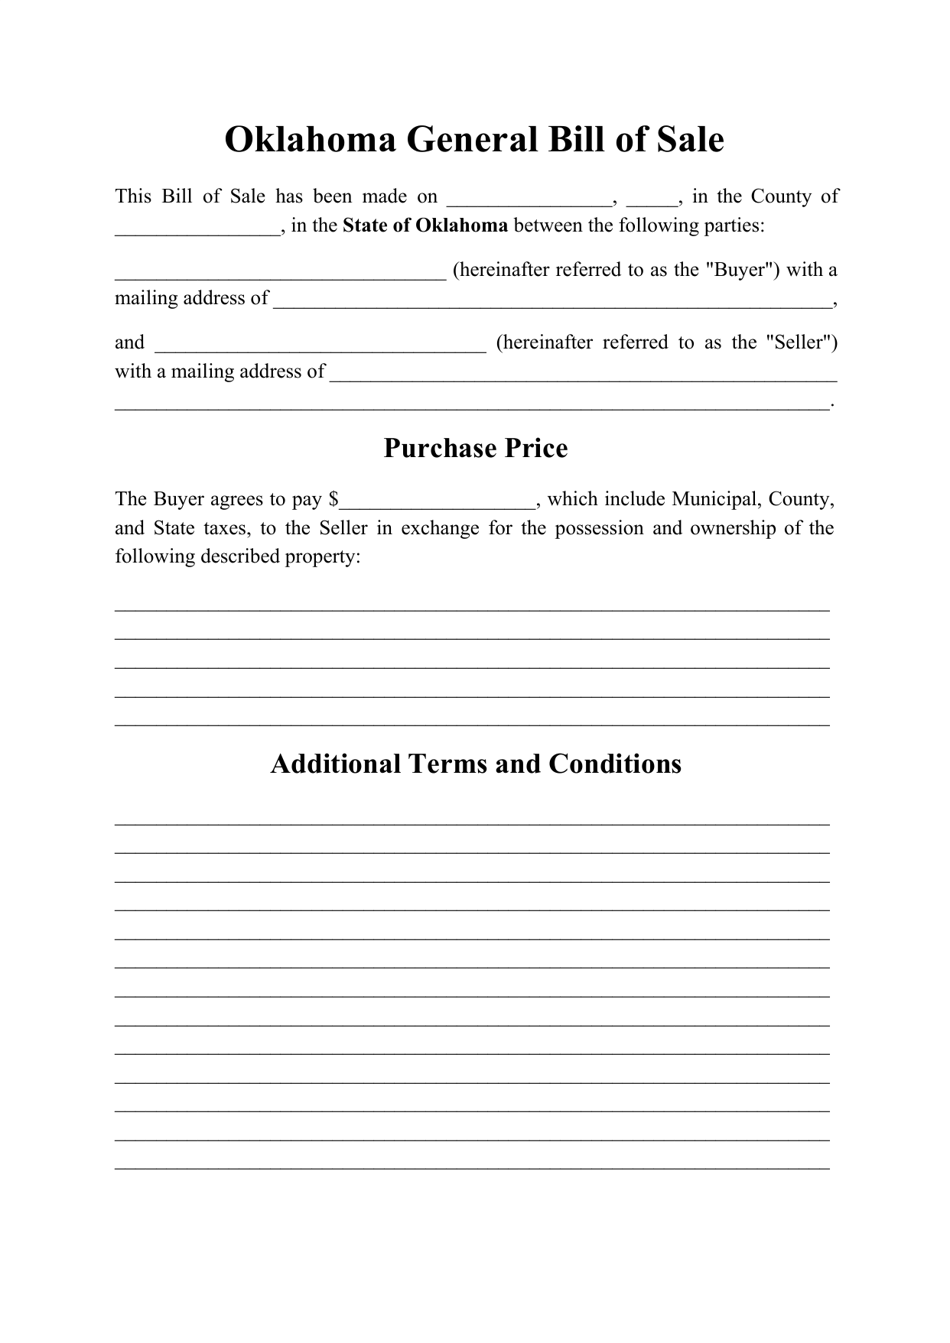 Generic Bill of Sale Form - Oklahoma, Page 1